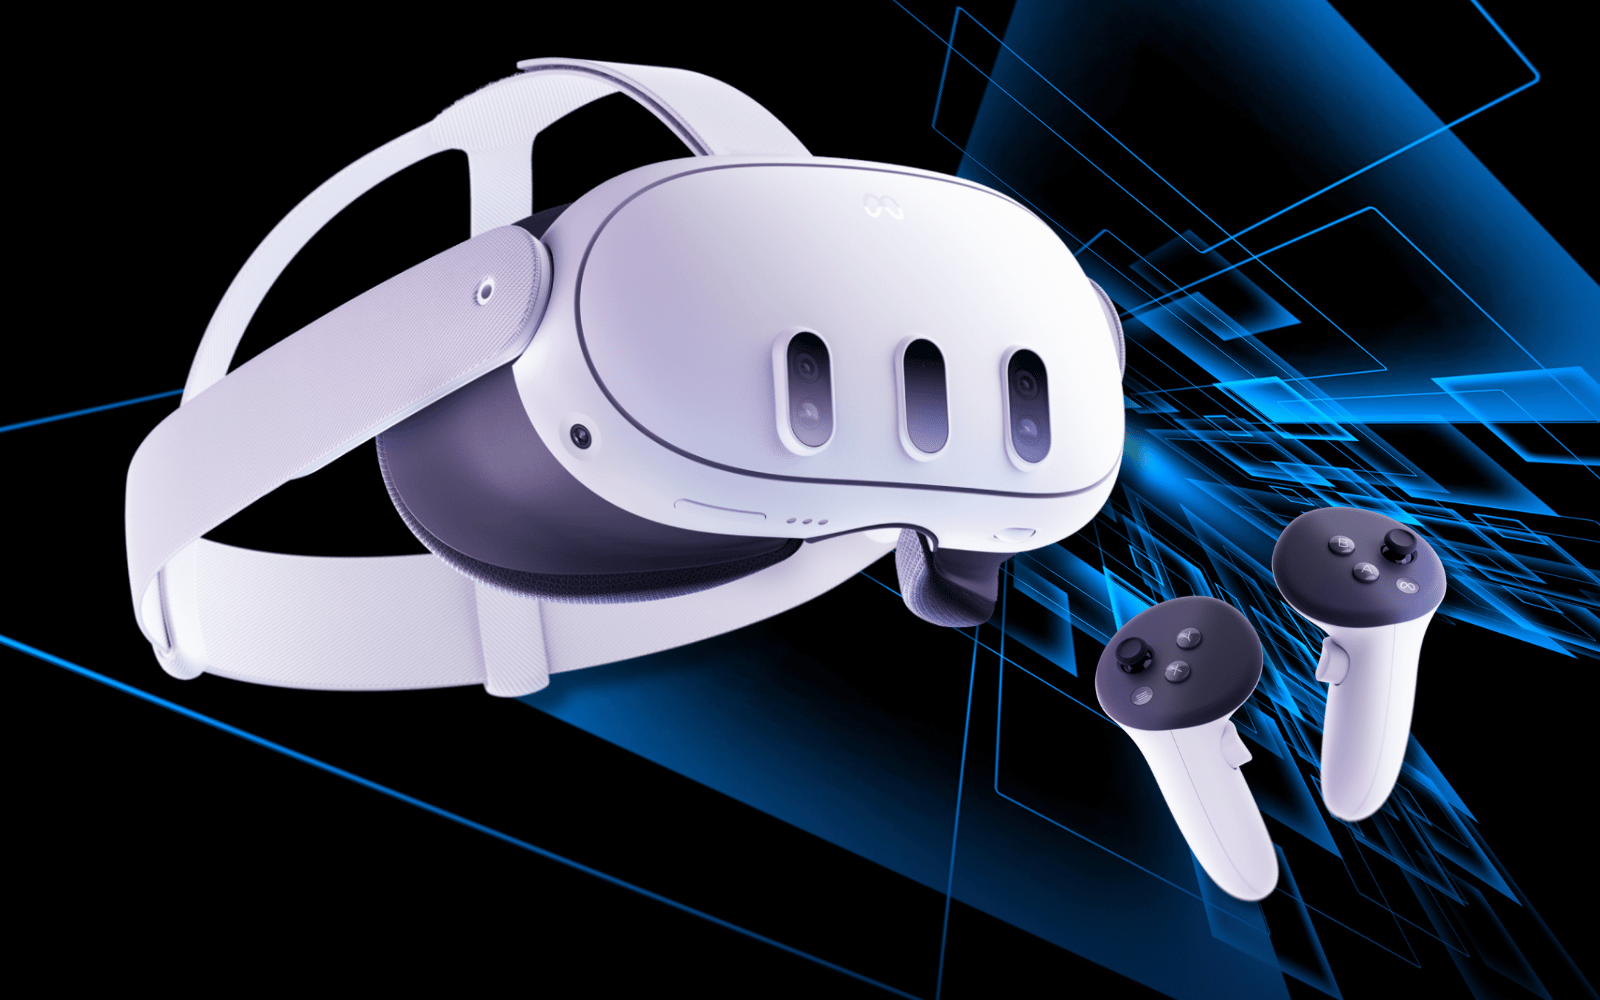 Meta Quest 3 VR Headset: Pricing, Where to Pre-Order Online